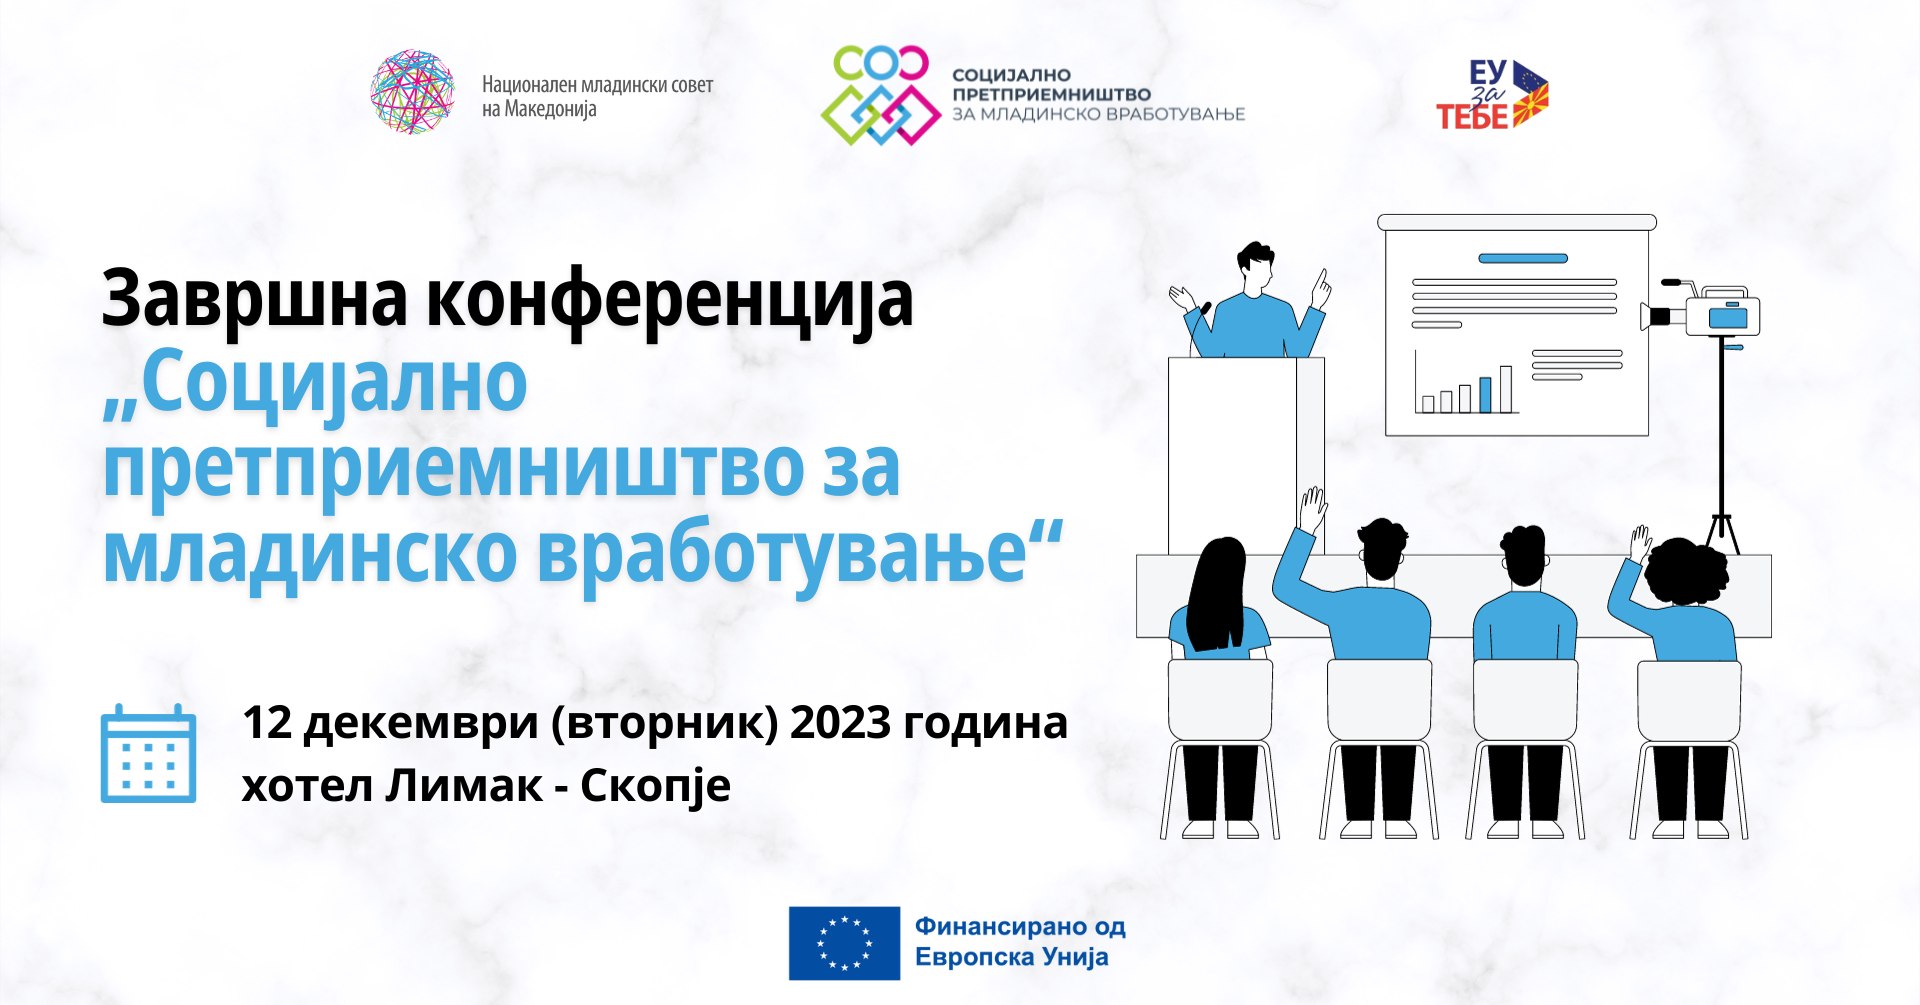 Final Conference of the Project "Social entrepreneurship for youth employment"